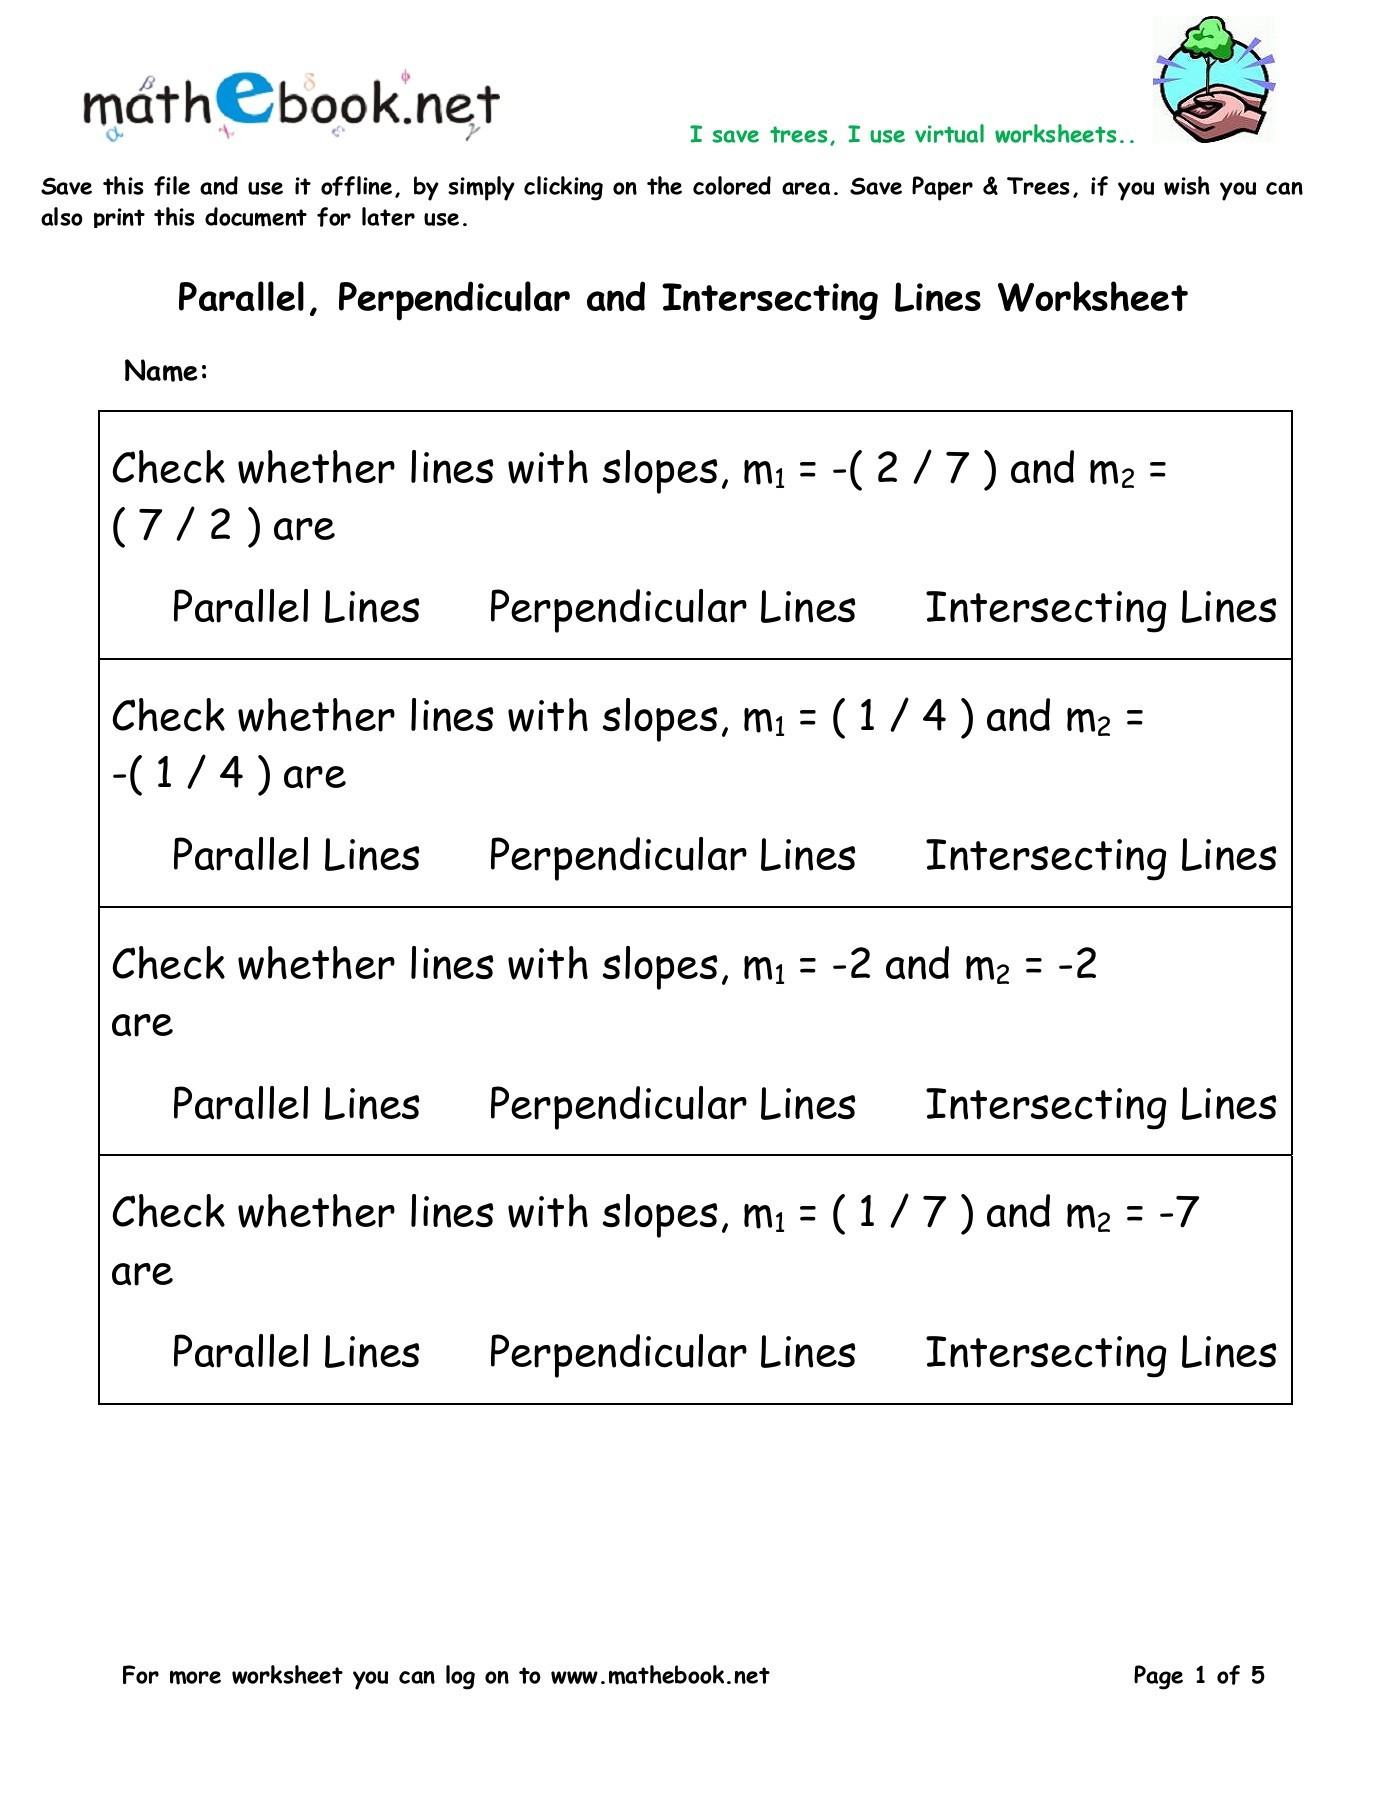 Parallel and Perpendicular Lines Worksheet Parallel Perpendicular and Intersecting Lines Worksheet